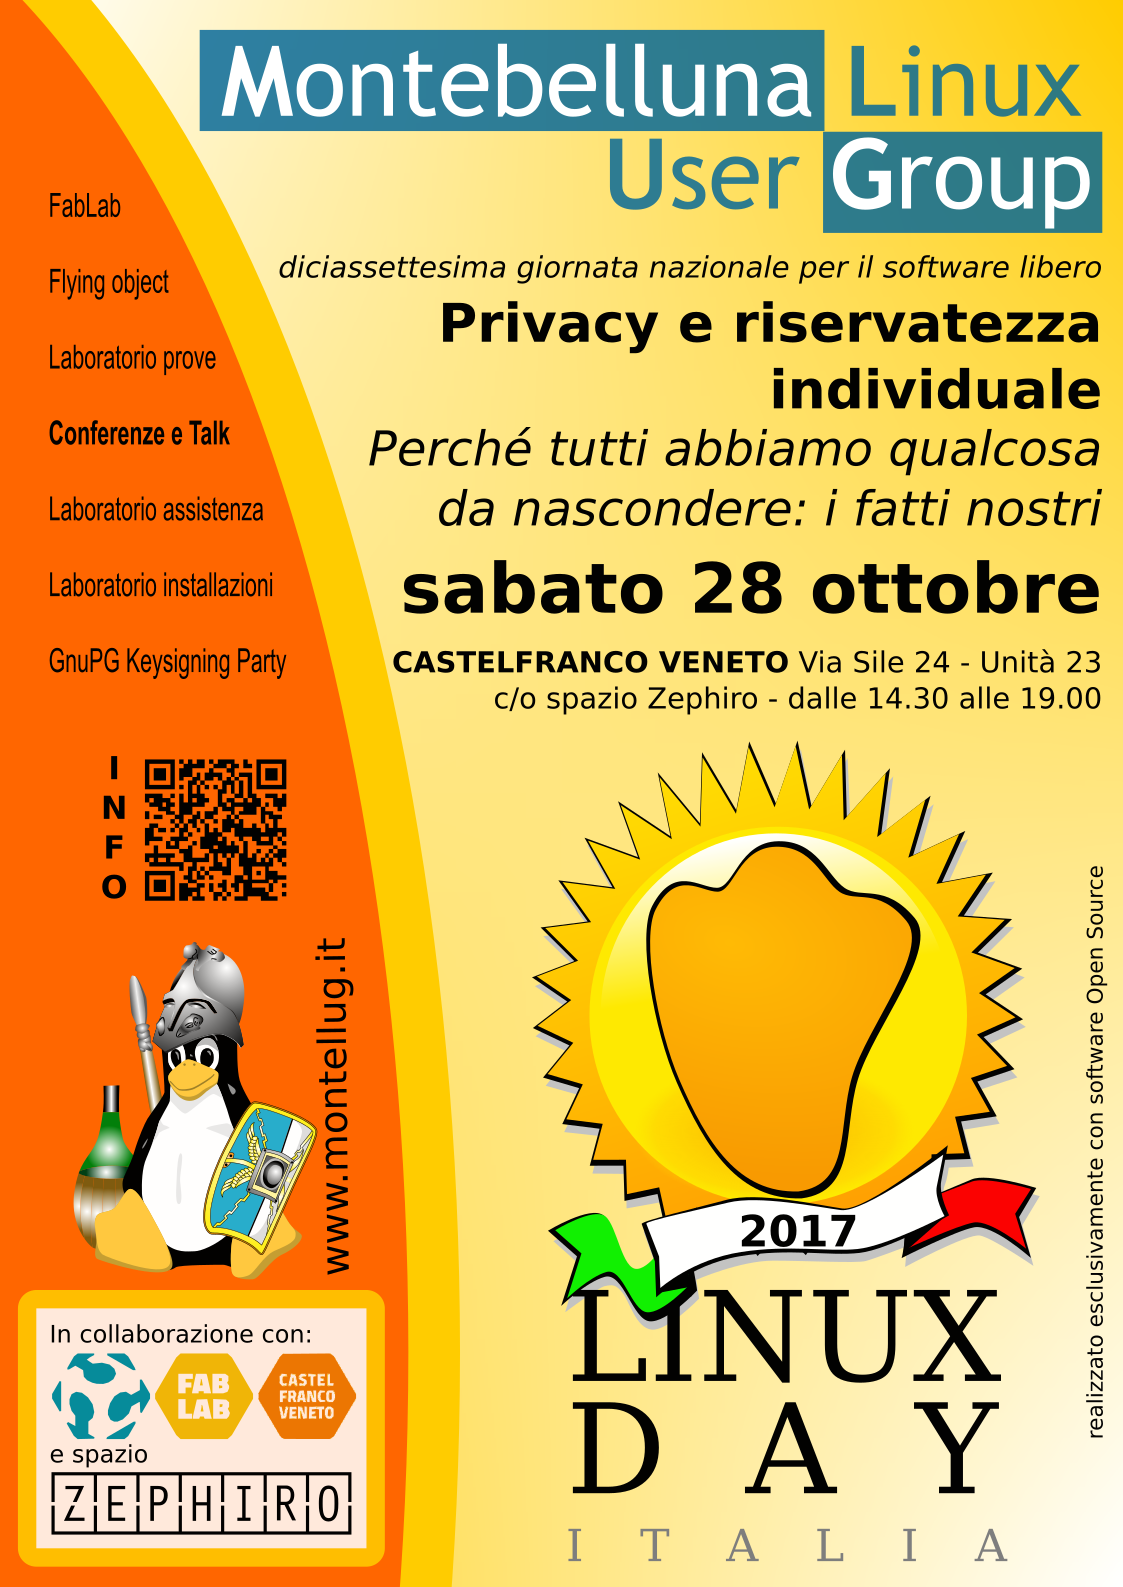 LINUX DAY 2017